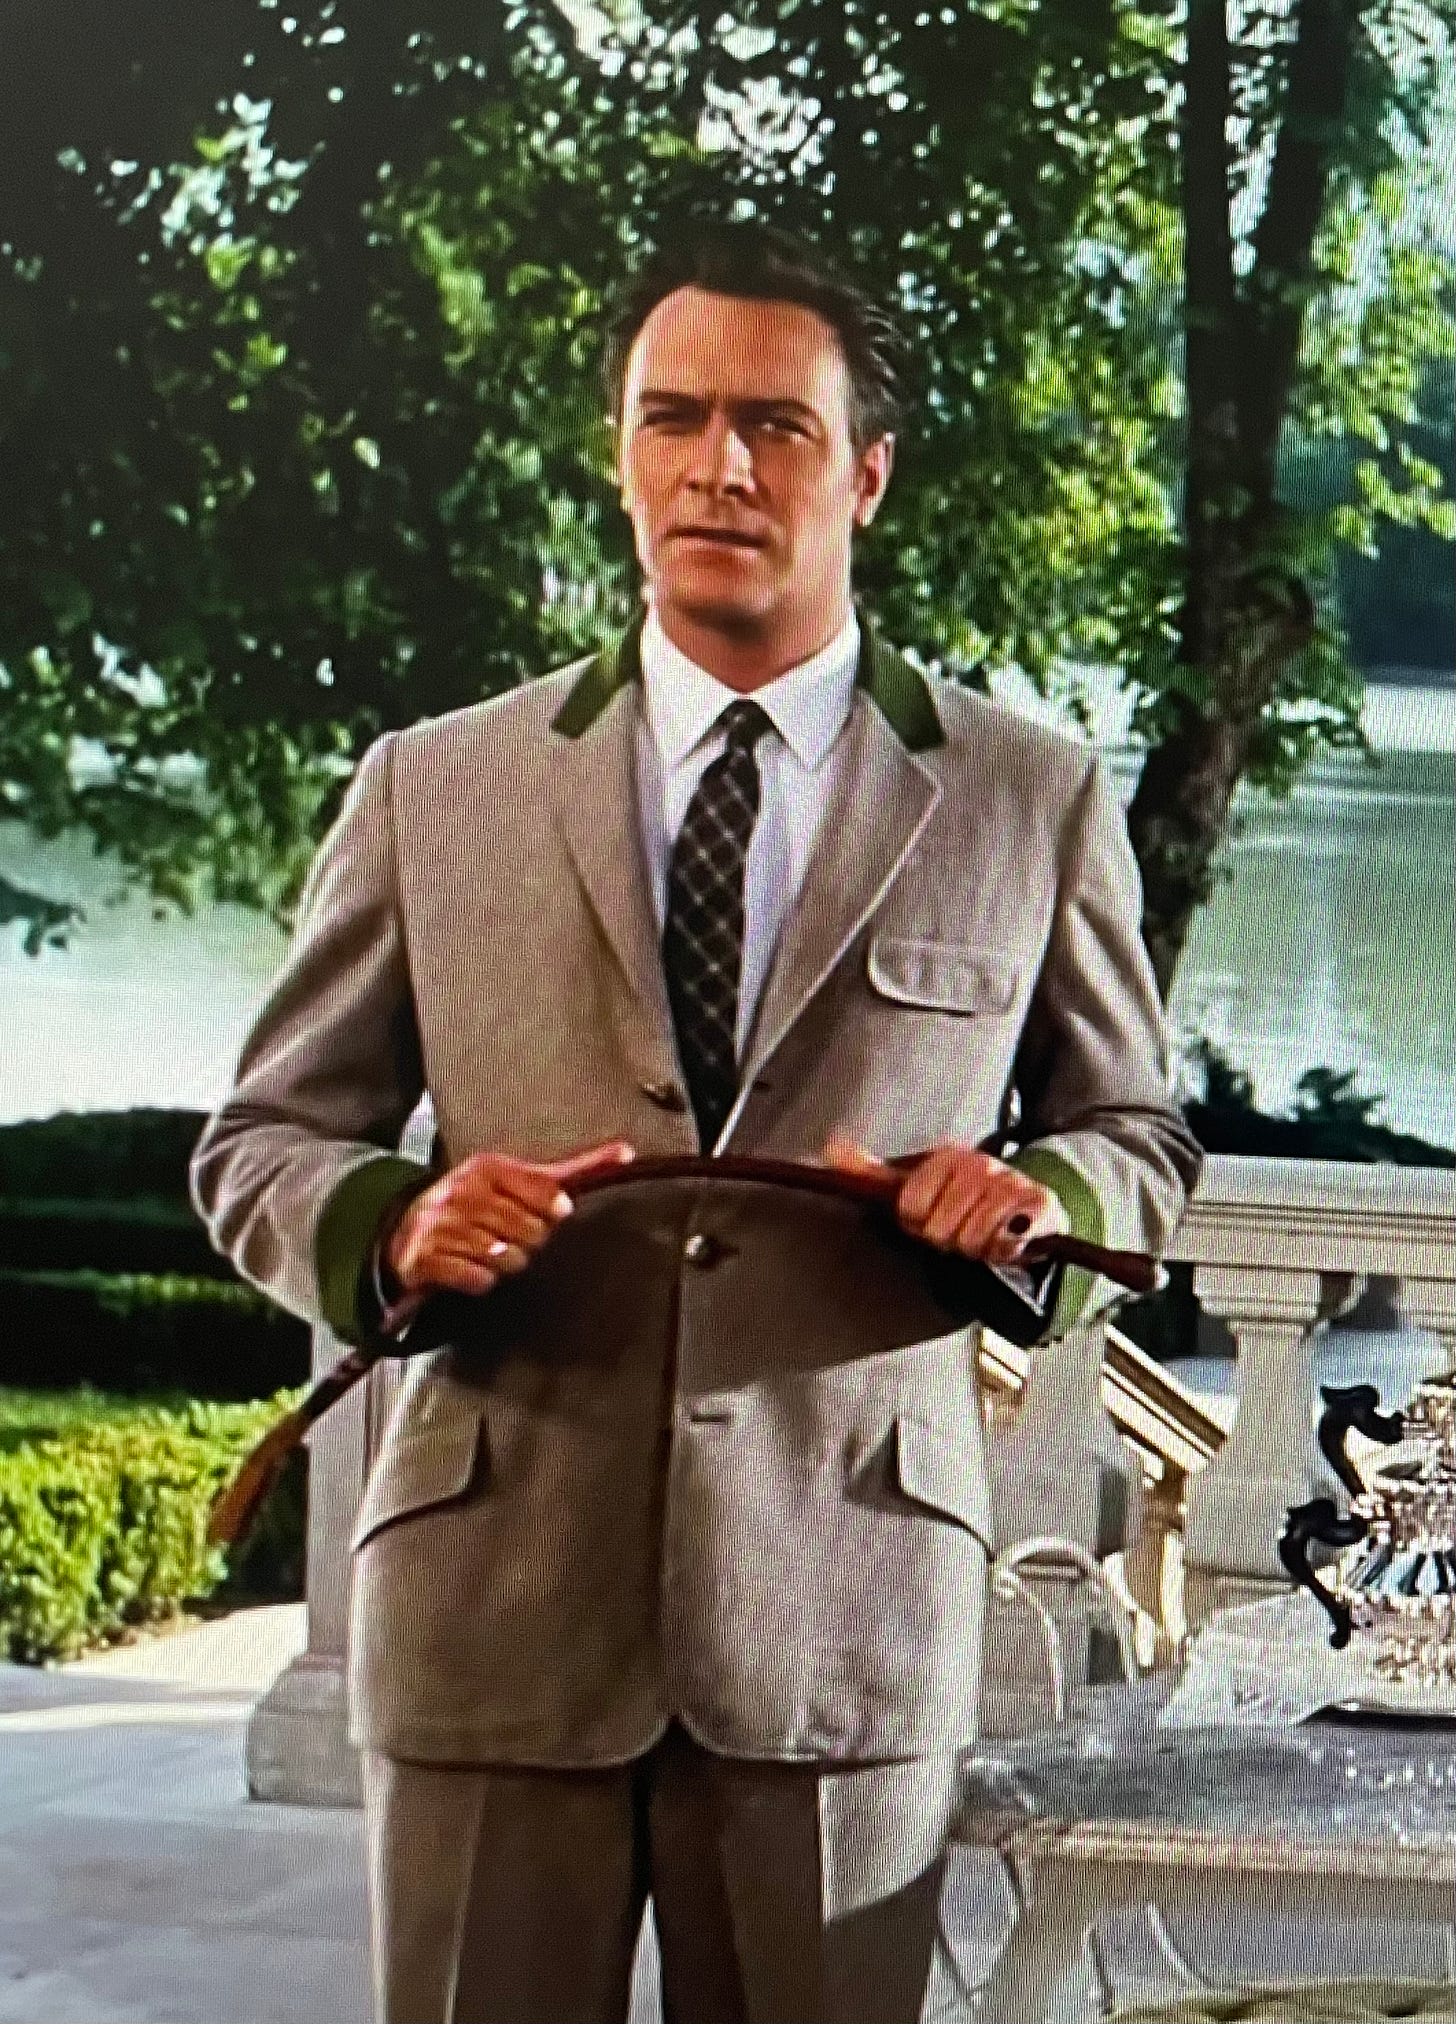 Captain Von Trapp holds a riding crop in both hands, bending it slightly, while looking stern